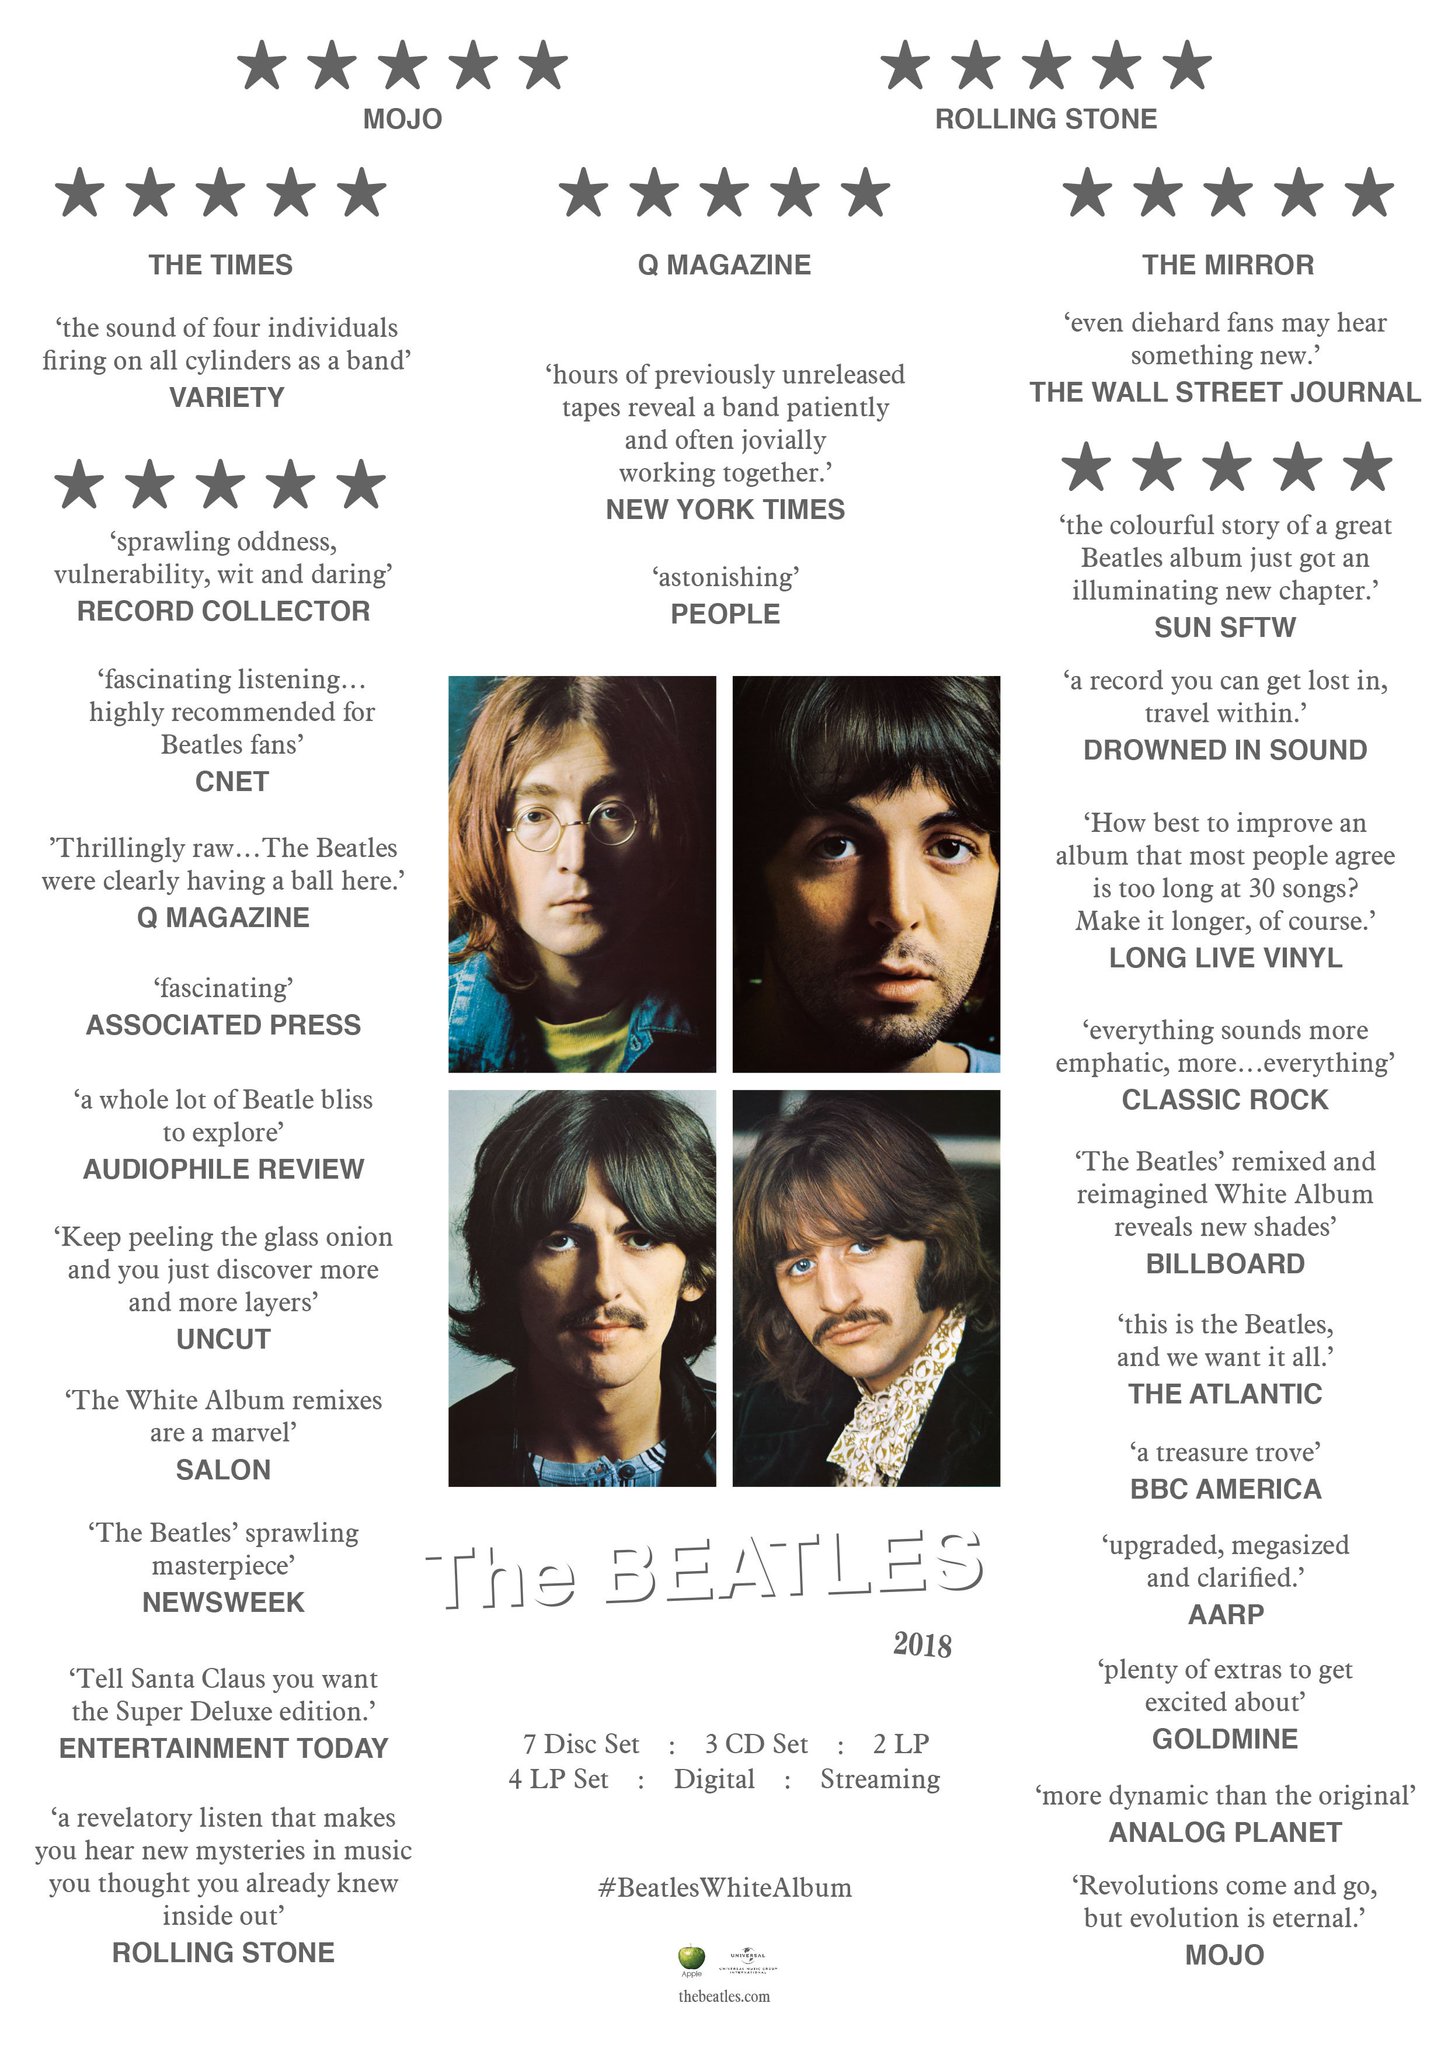 Beatles on Twitter: "Out Now. The Beatles (White Album) Anniversary Editions. #beatleswhitealbum / Twitter